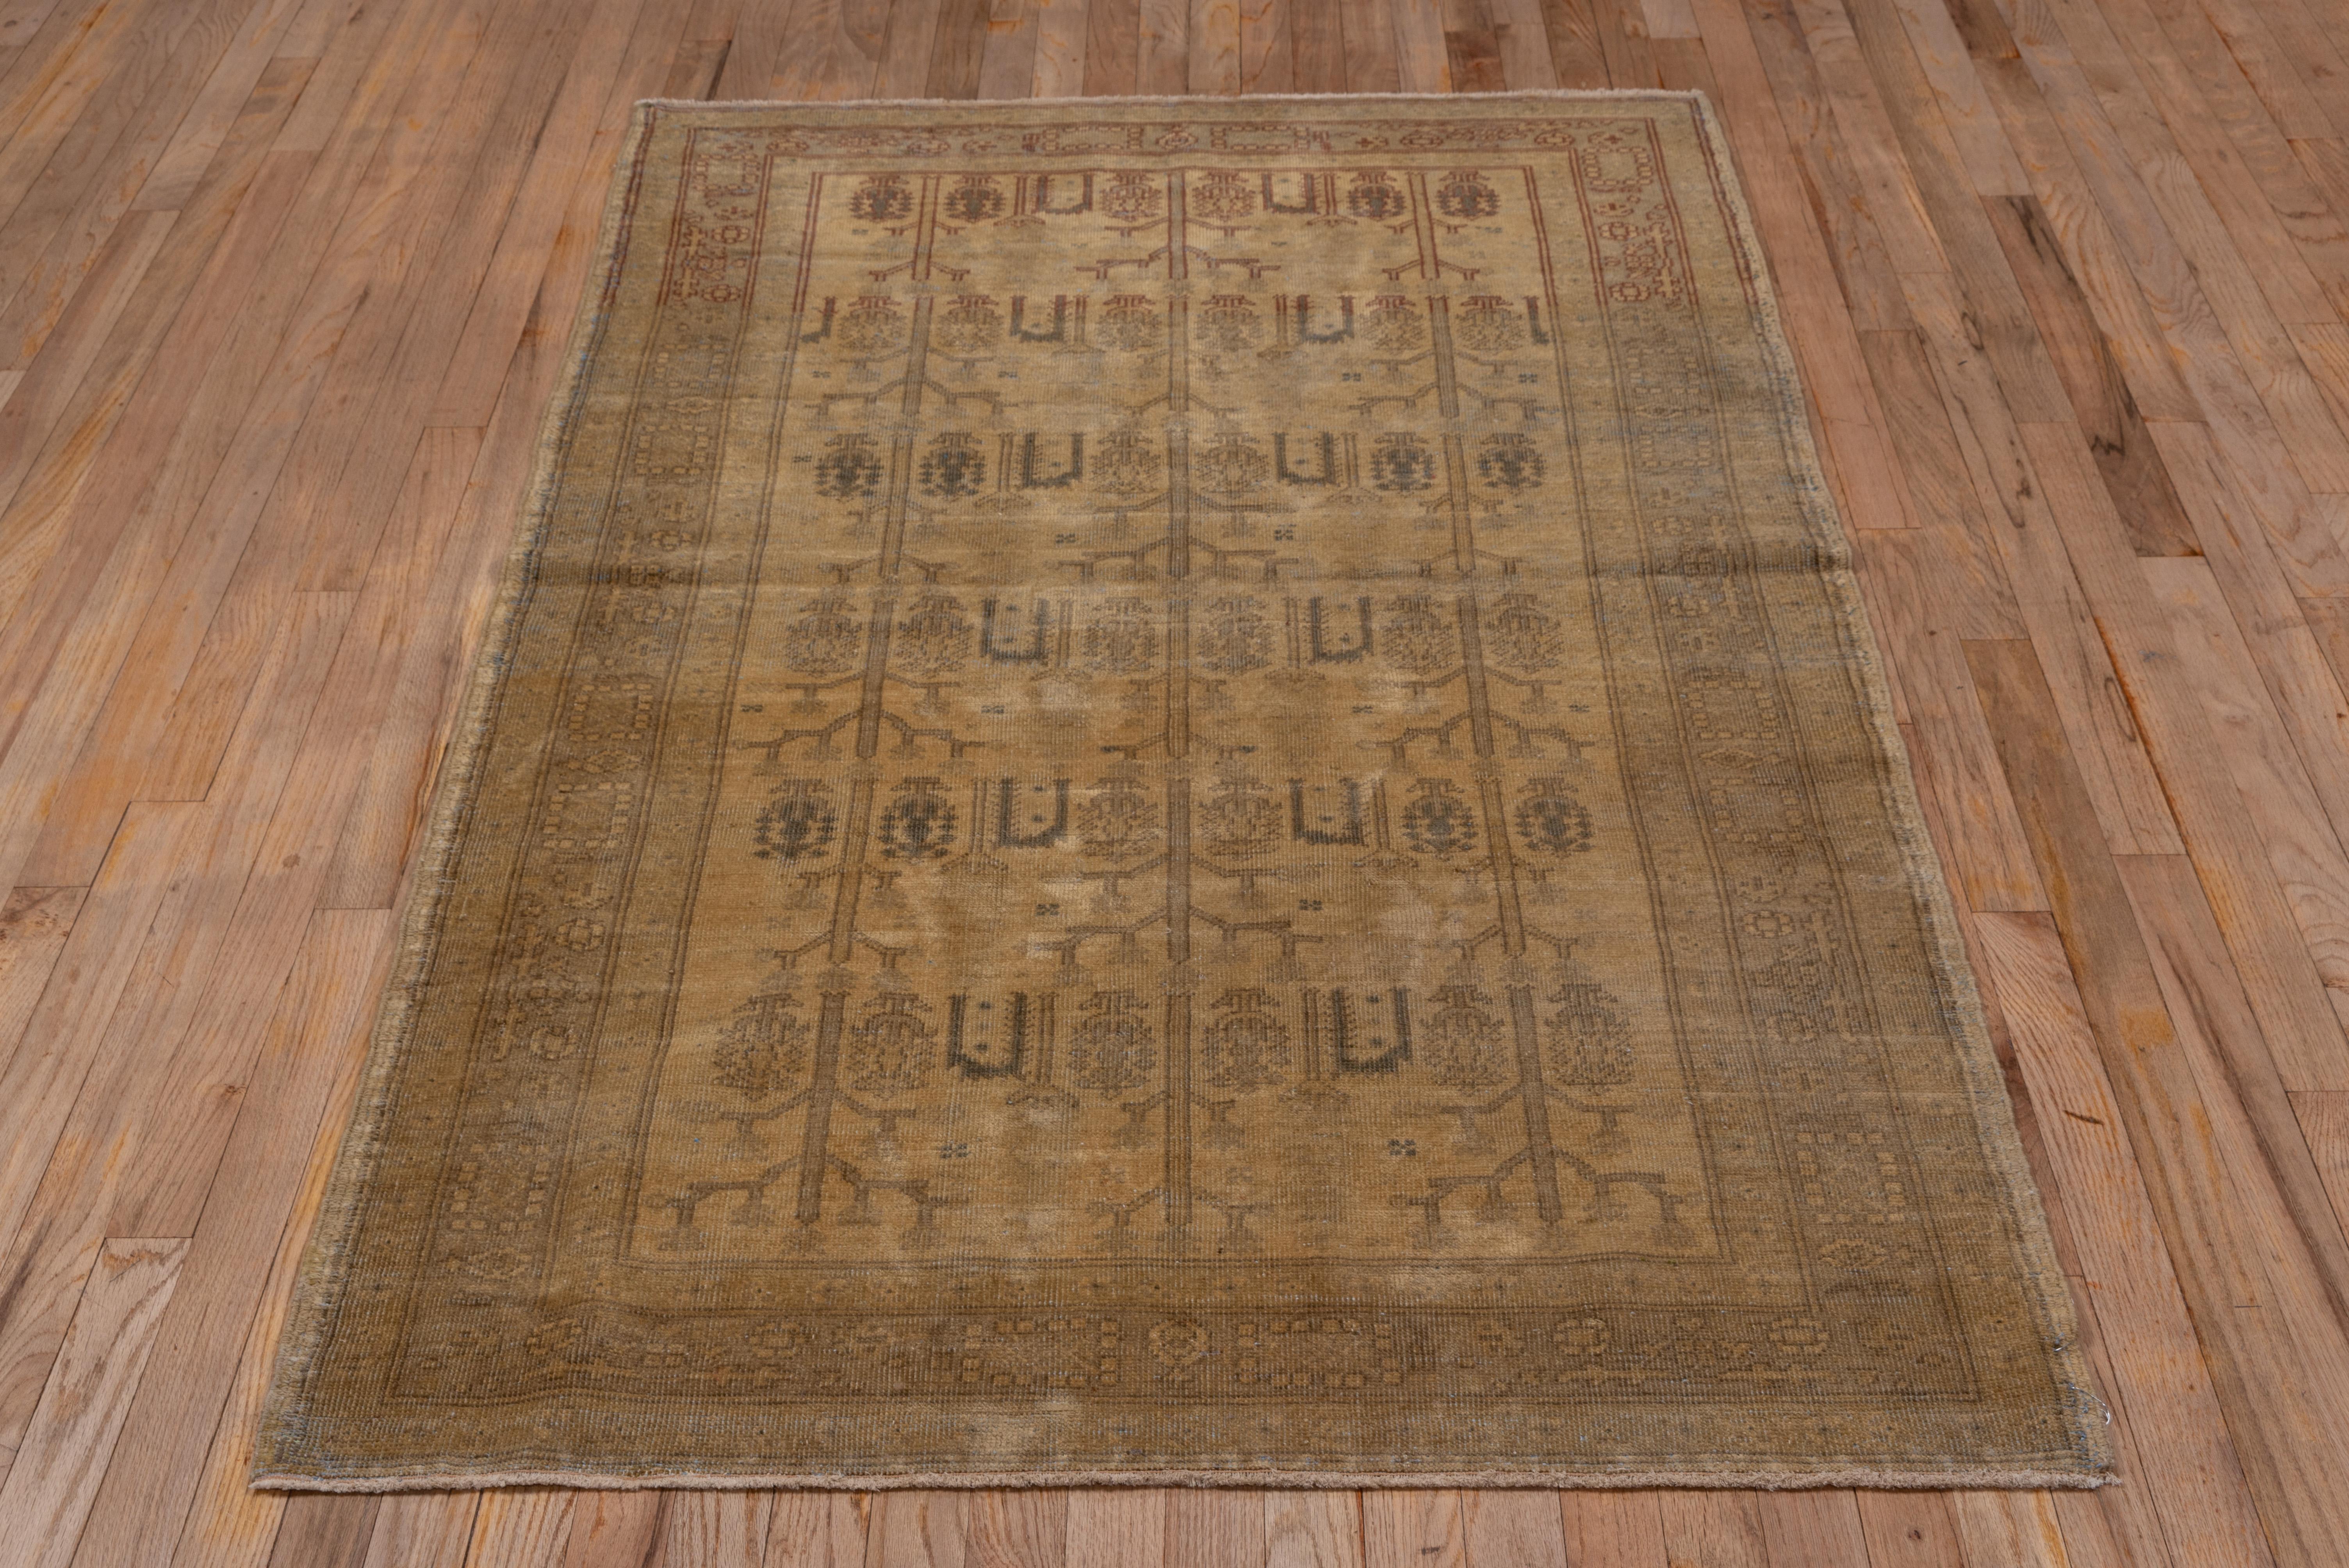 Rustic Vintage Turkish Anatolian Rug, Dark Neutral Palette, Shabby Chic In Good Condition For Sale In New York, NY